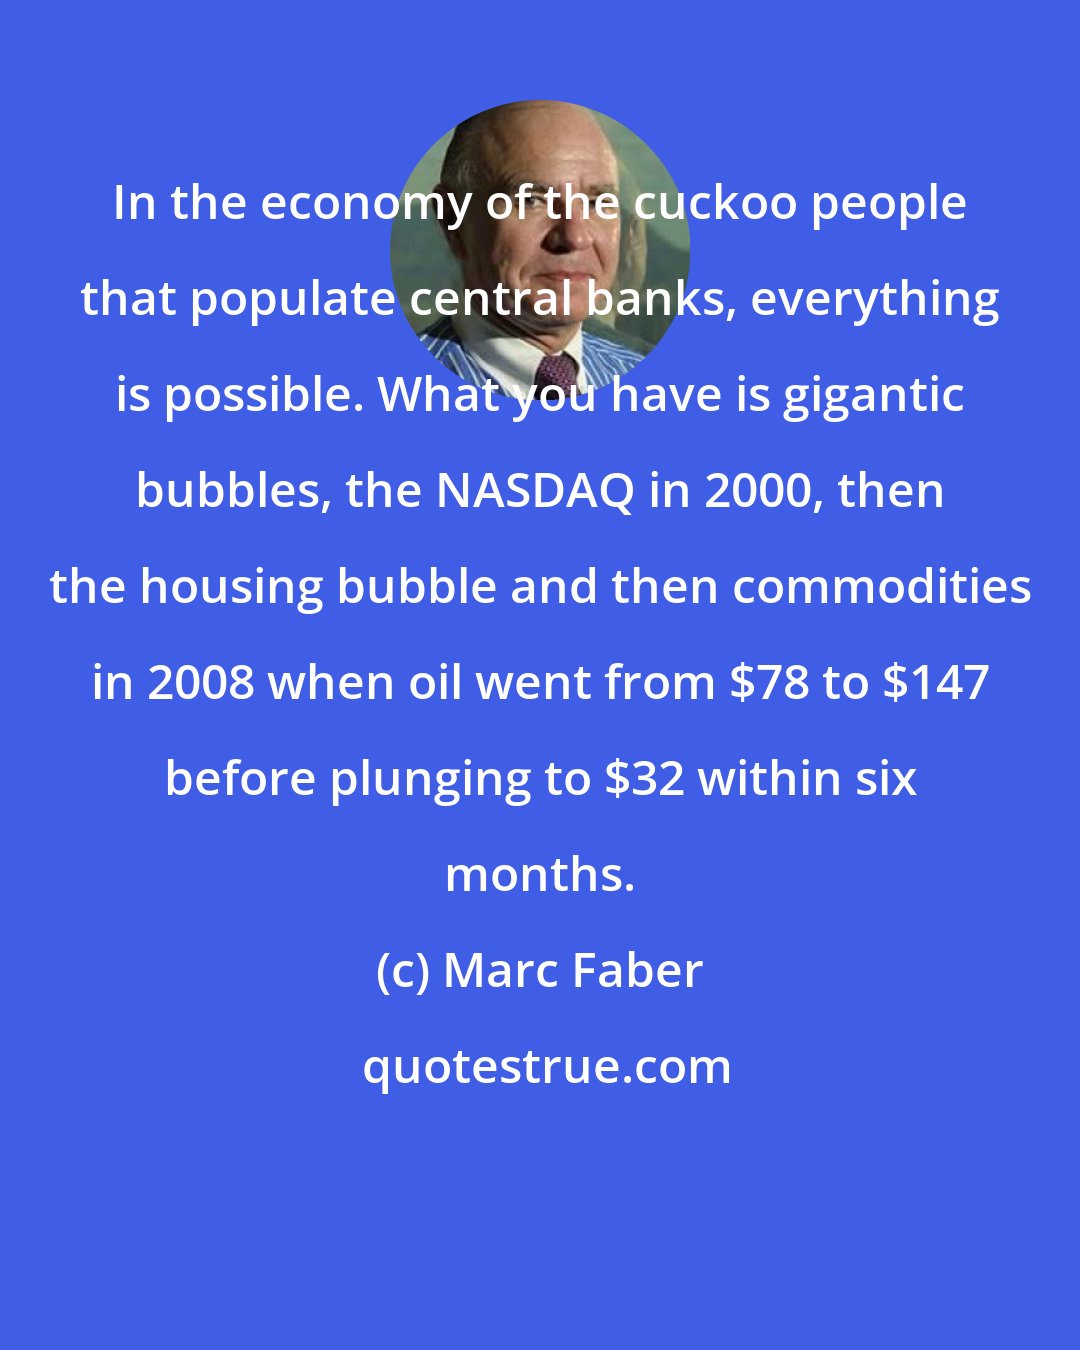 Marc Faber: In the economy of the cuckoo people that populate central banks, everything is possible. What you have is gigantic bubbles, the NASDAQ in 2000, then the housing bubble and then commodities in 2008 when oil went from $78 to $147 before plunging to $32 within six months.